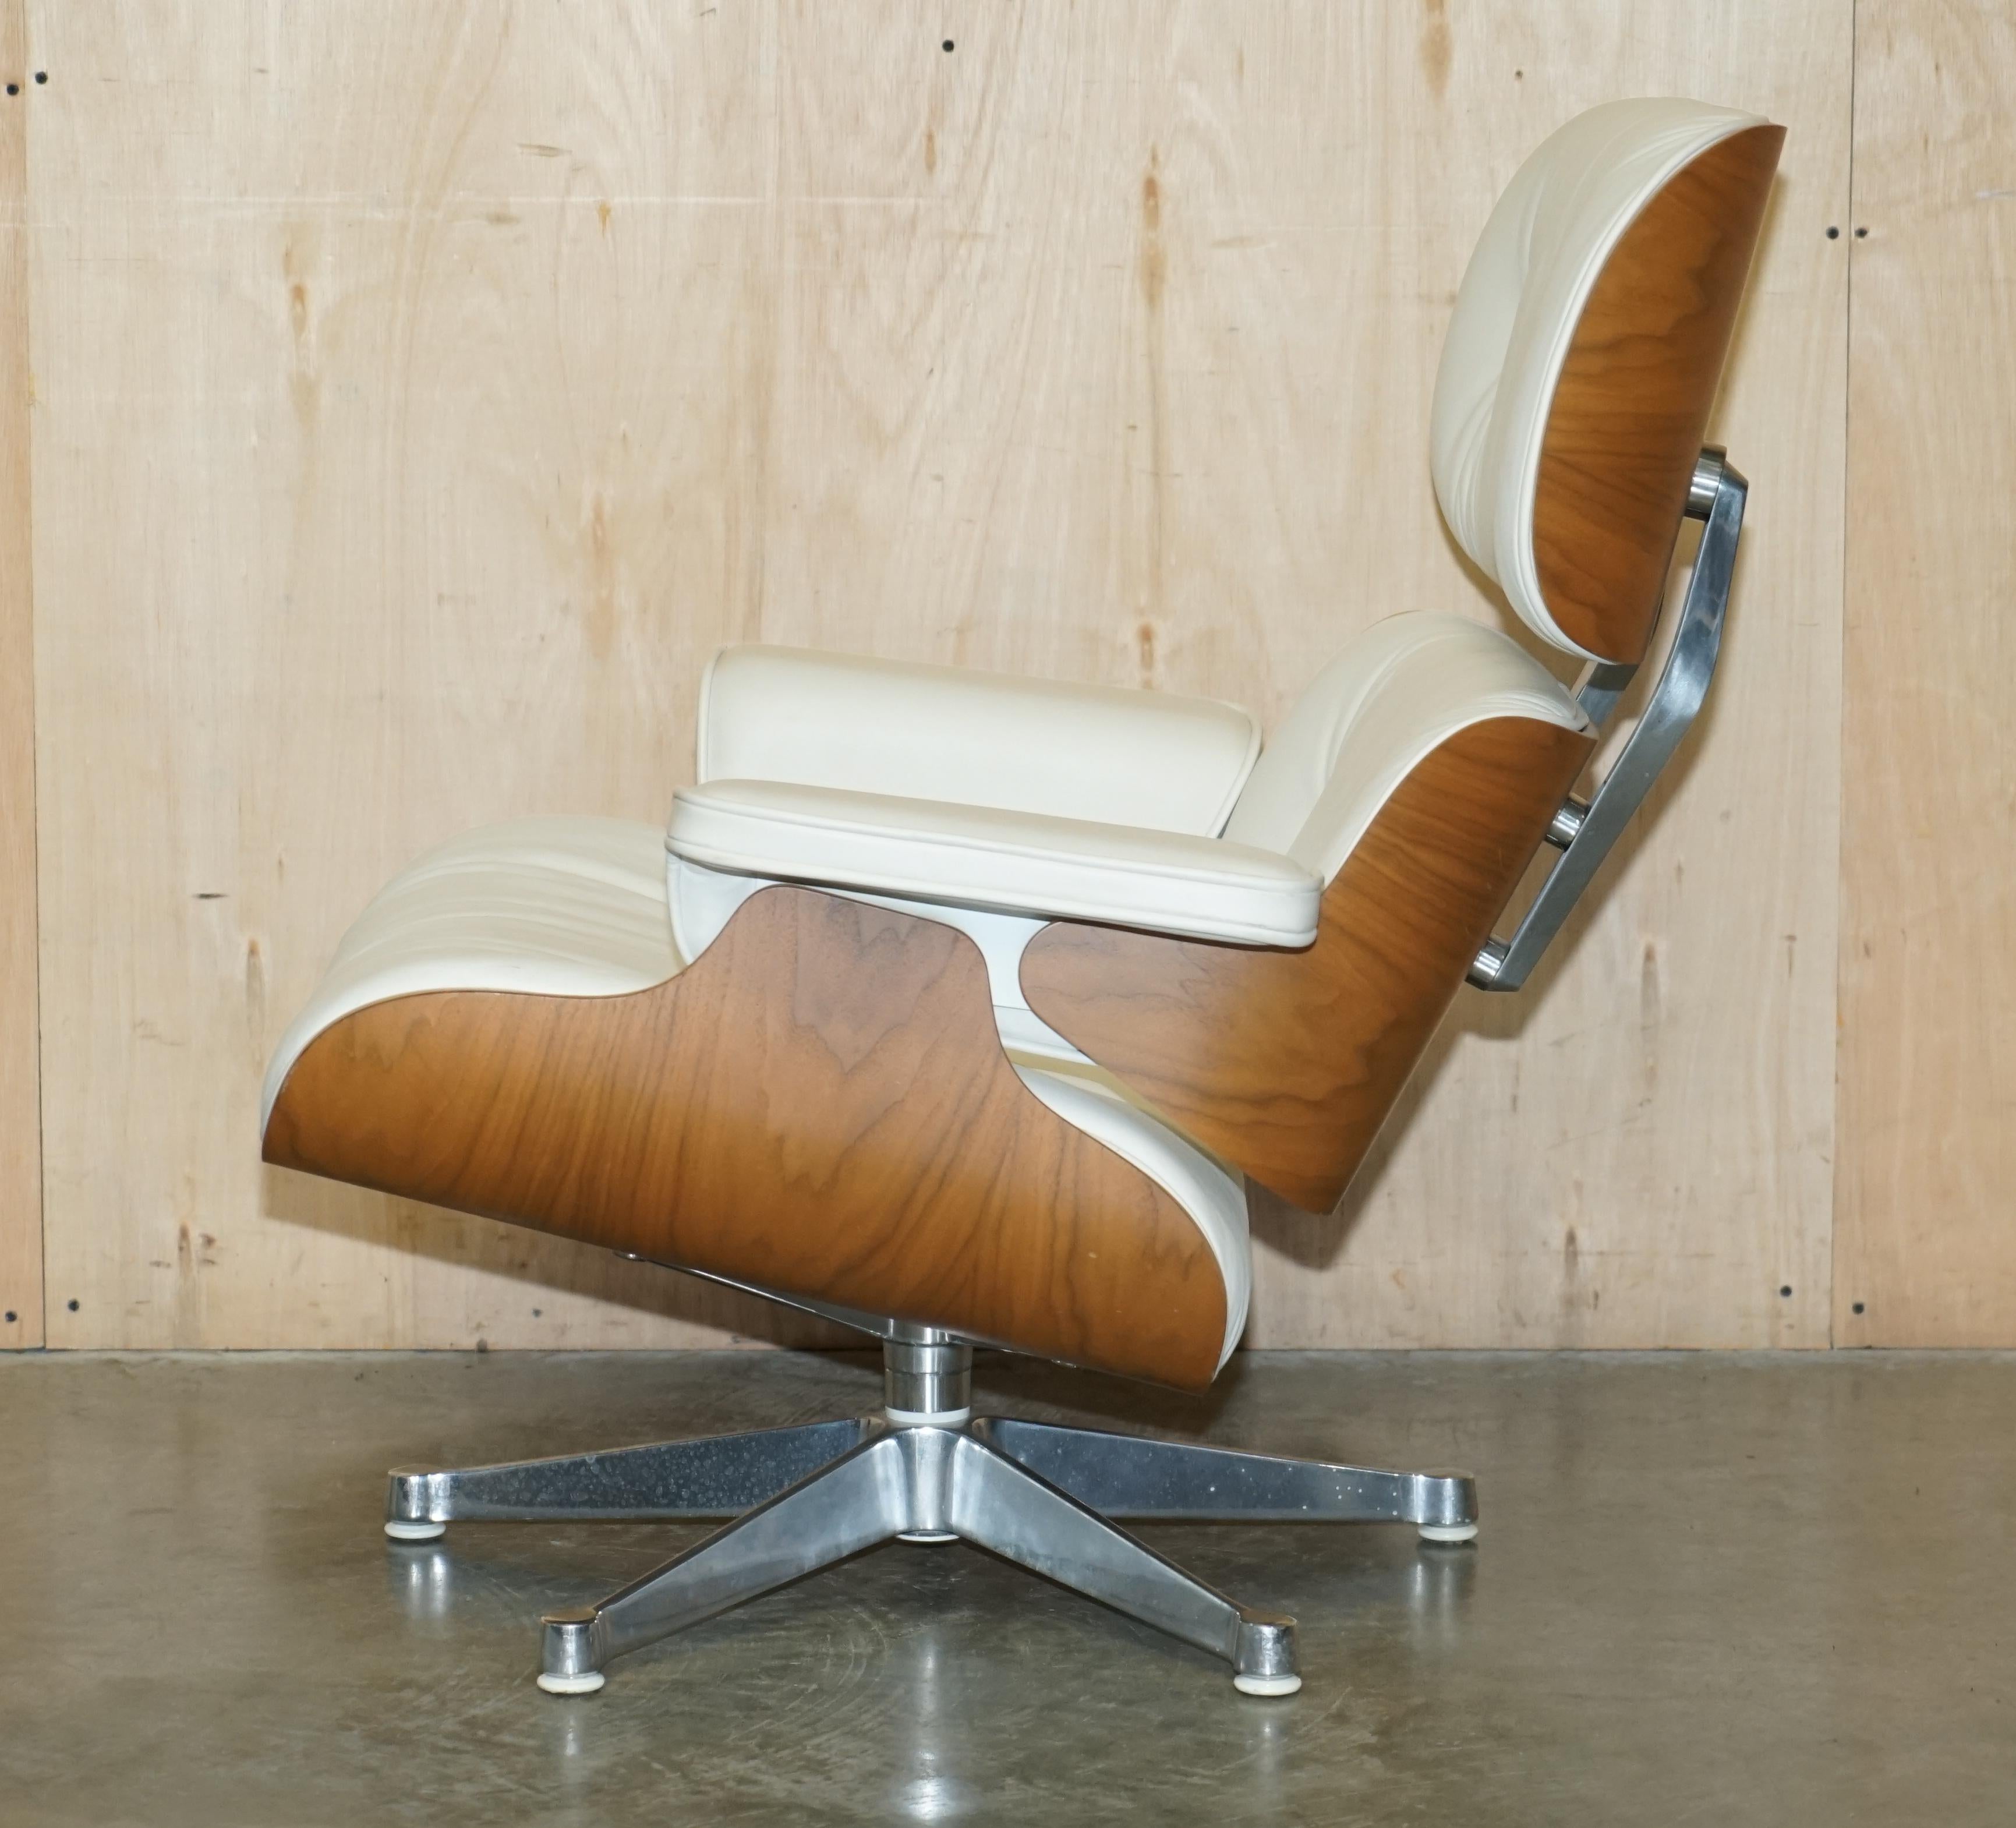 Whiting fauteuil de salon Charles and Ray Eames american cherry wood white leather en vente 12